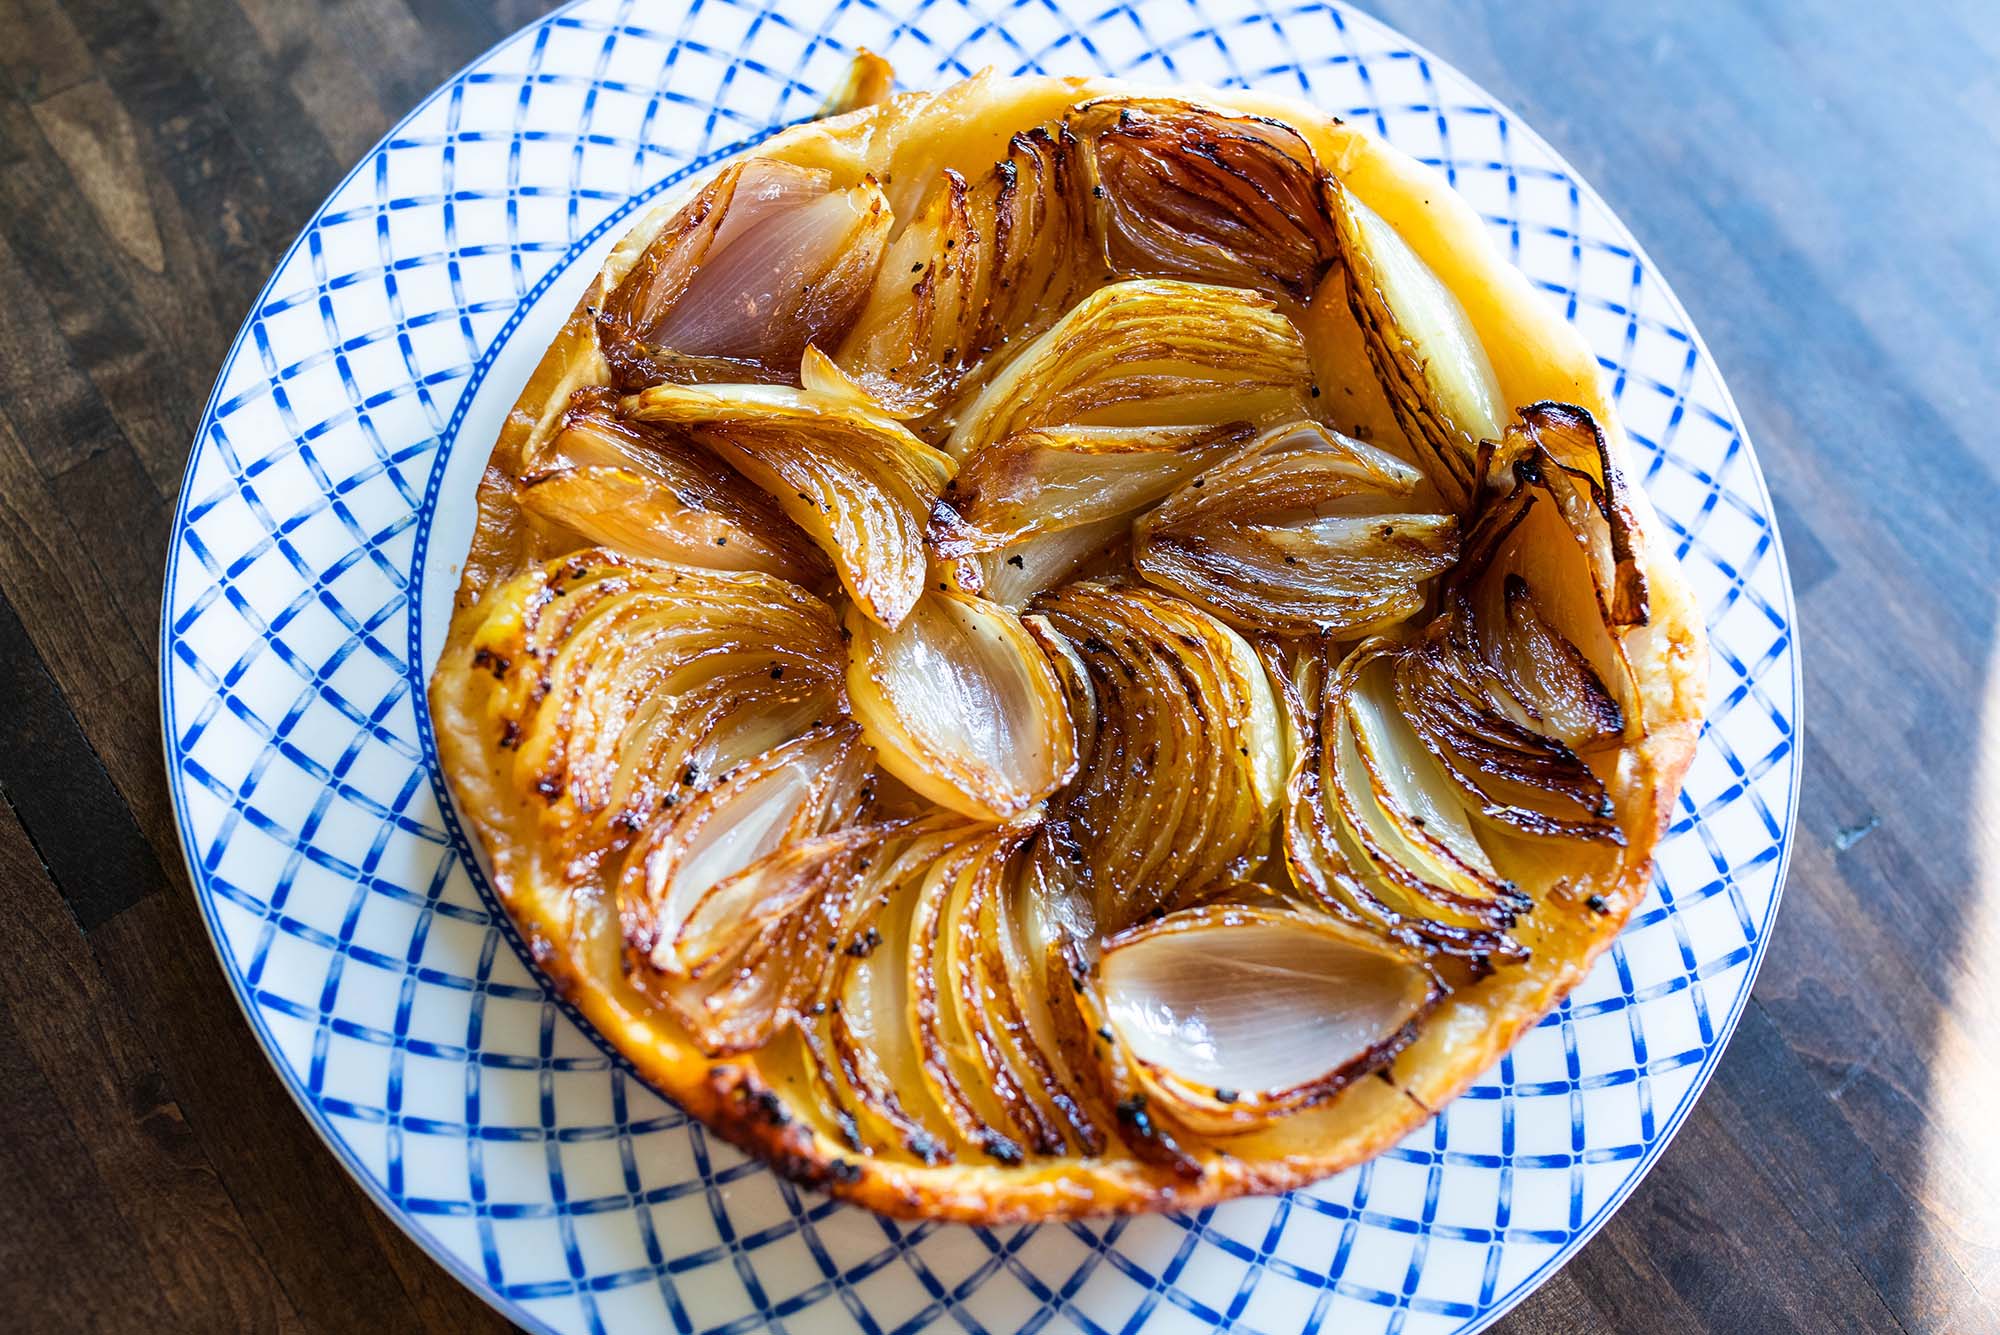 photo of an onion tarte tatin. The onions are nice and carmelized; the tarte rests on a white plate with a blue border.